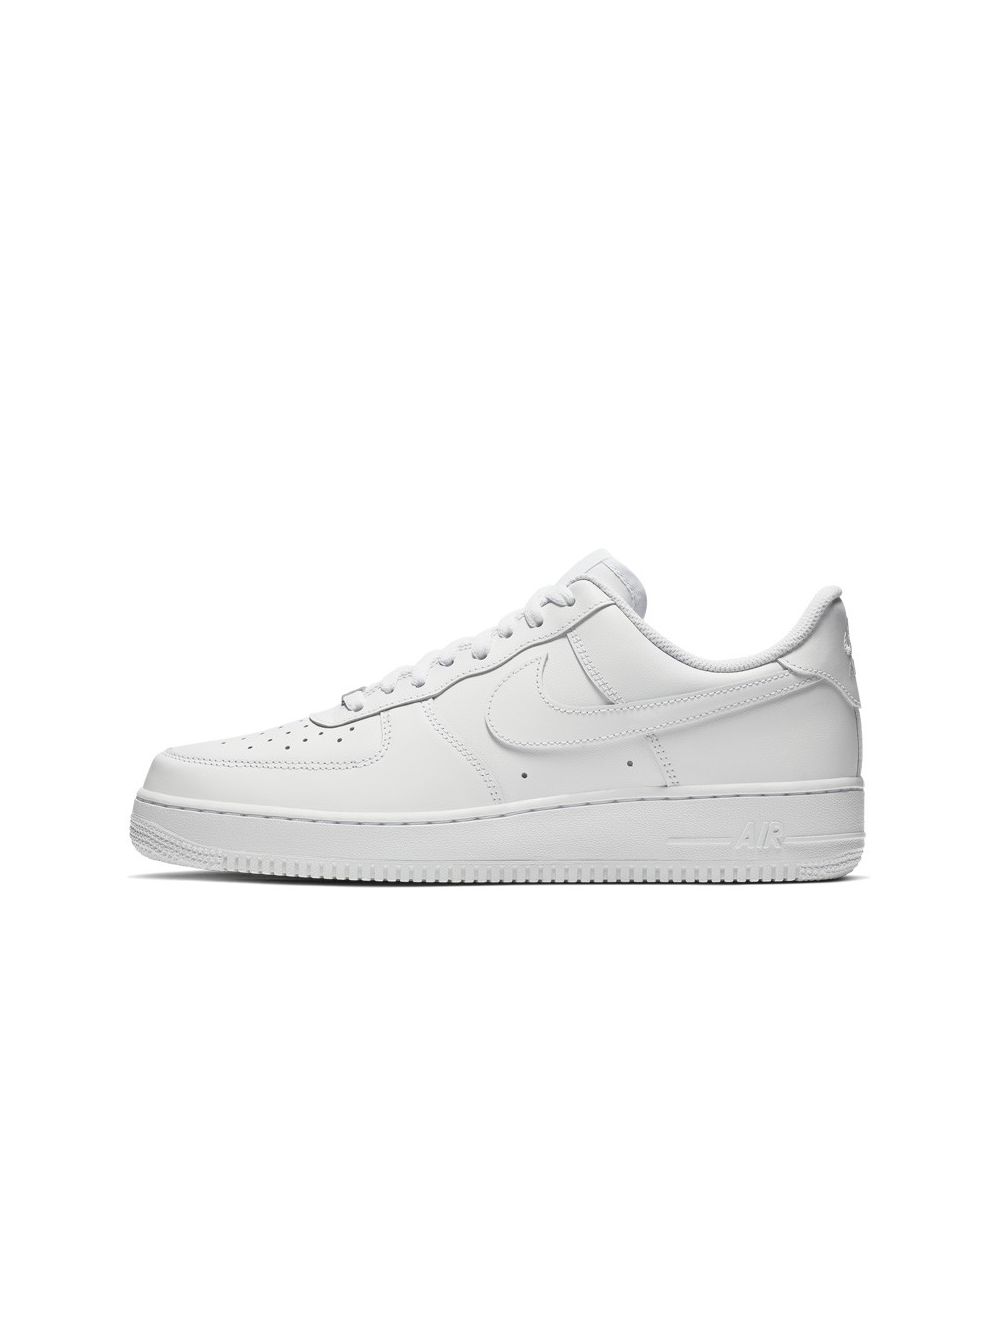 nike air force 1 youth 3.5